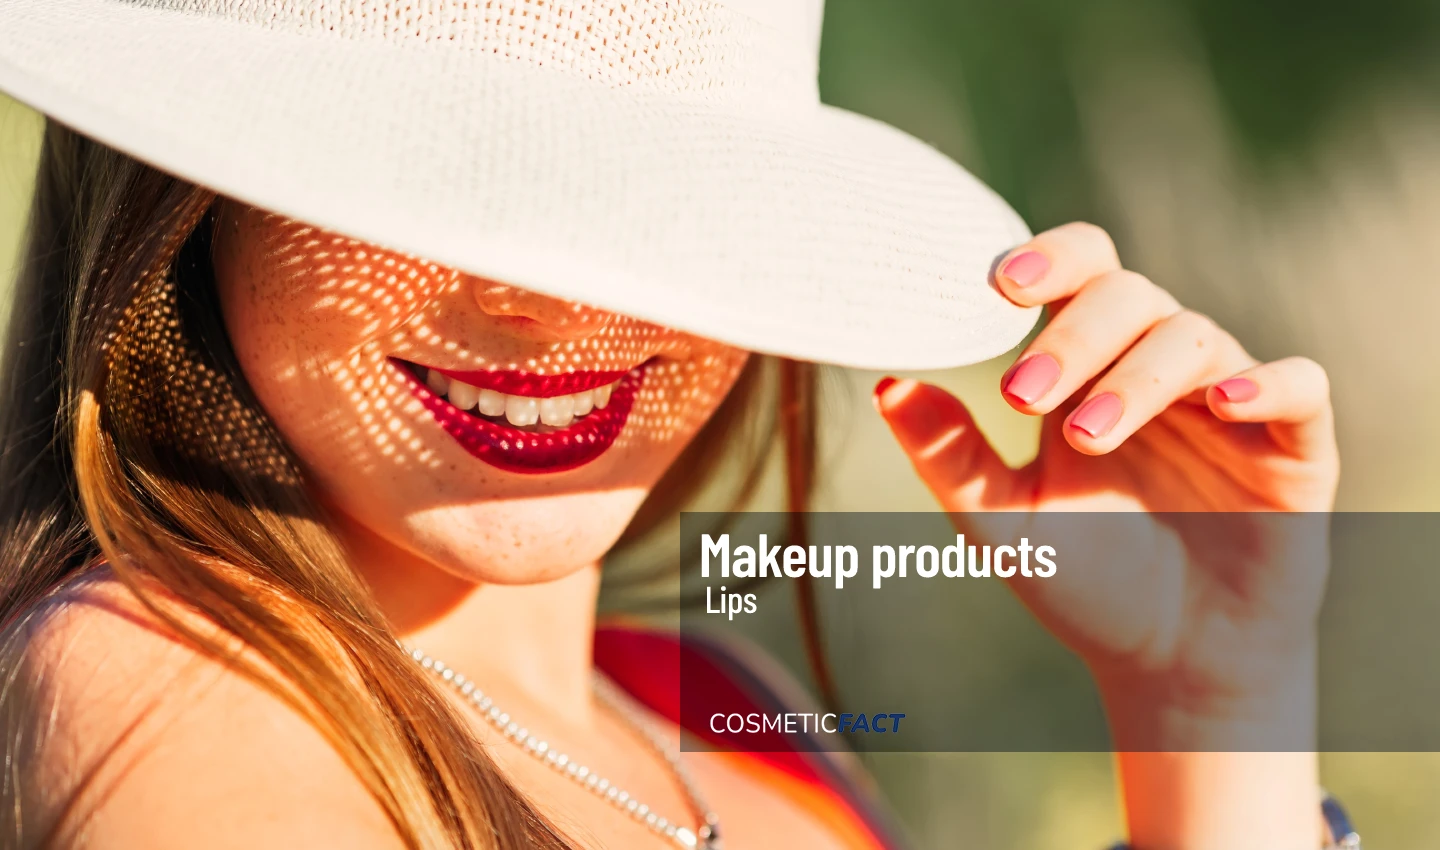 Woman with beautiful lipstick and hat holding a tube of sun-protective lip balm for outdoor adventures.